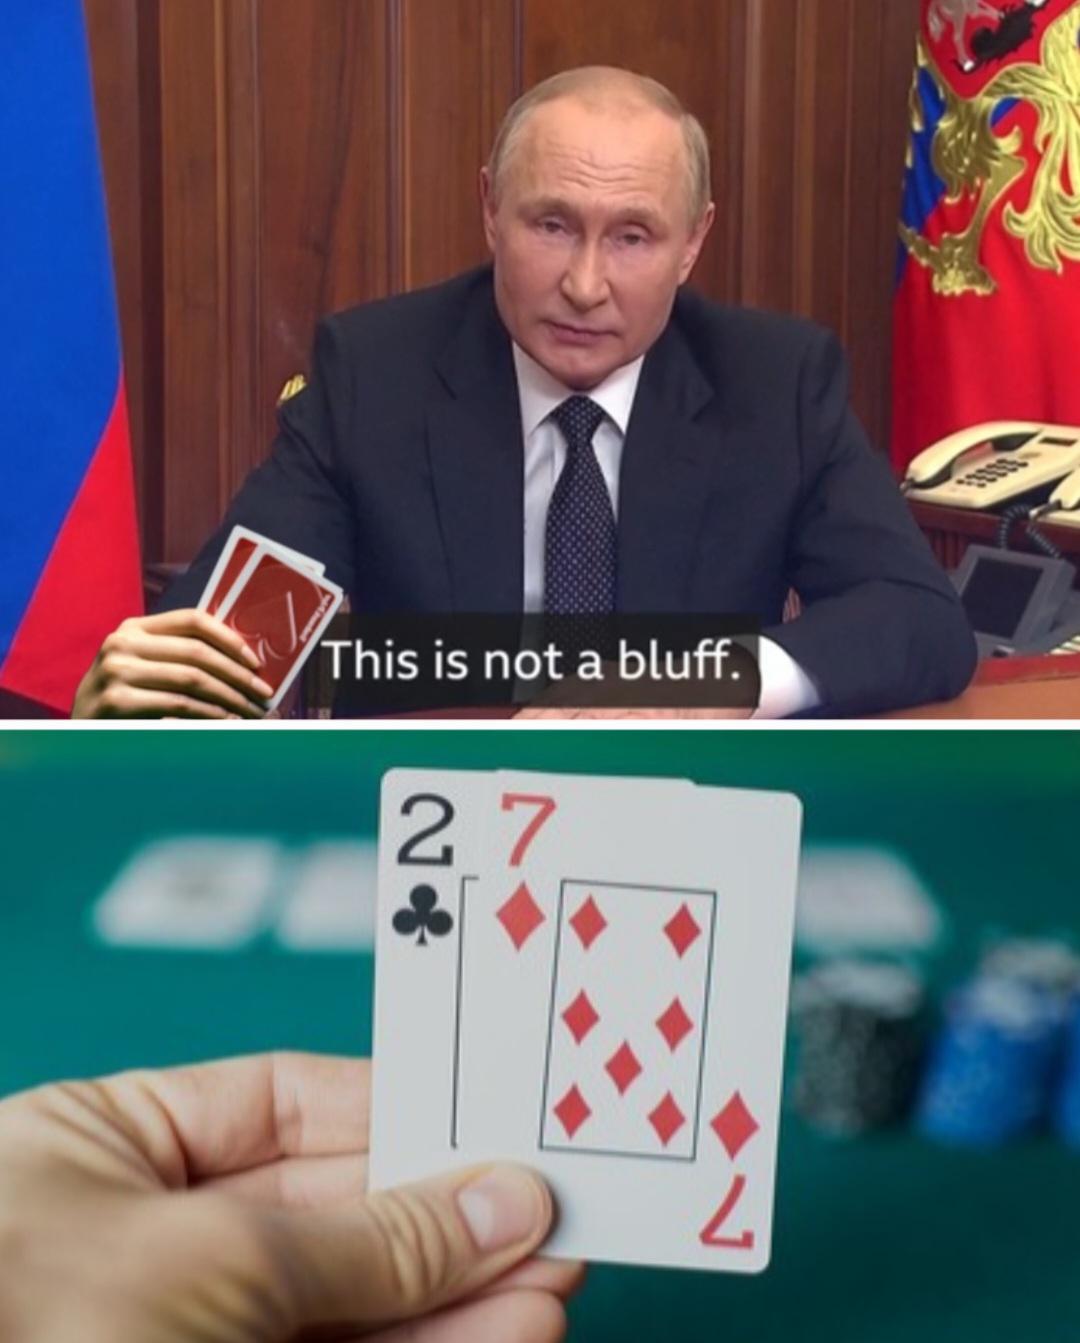 worst hand in poker - This is not a bluff. 27